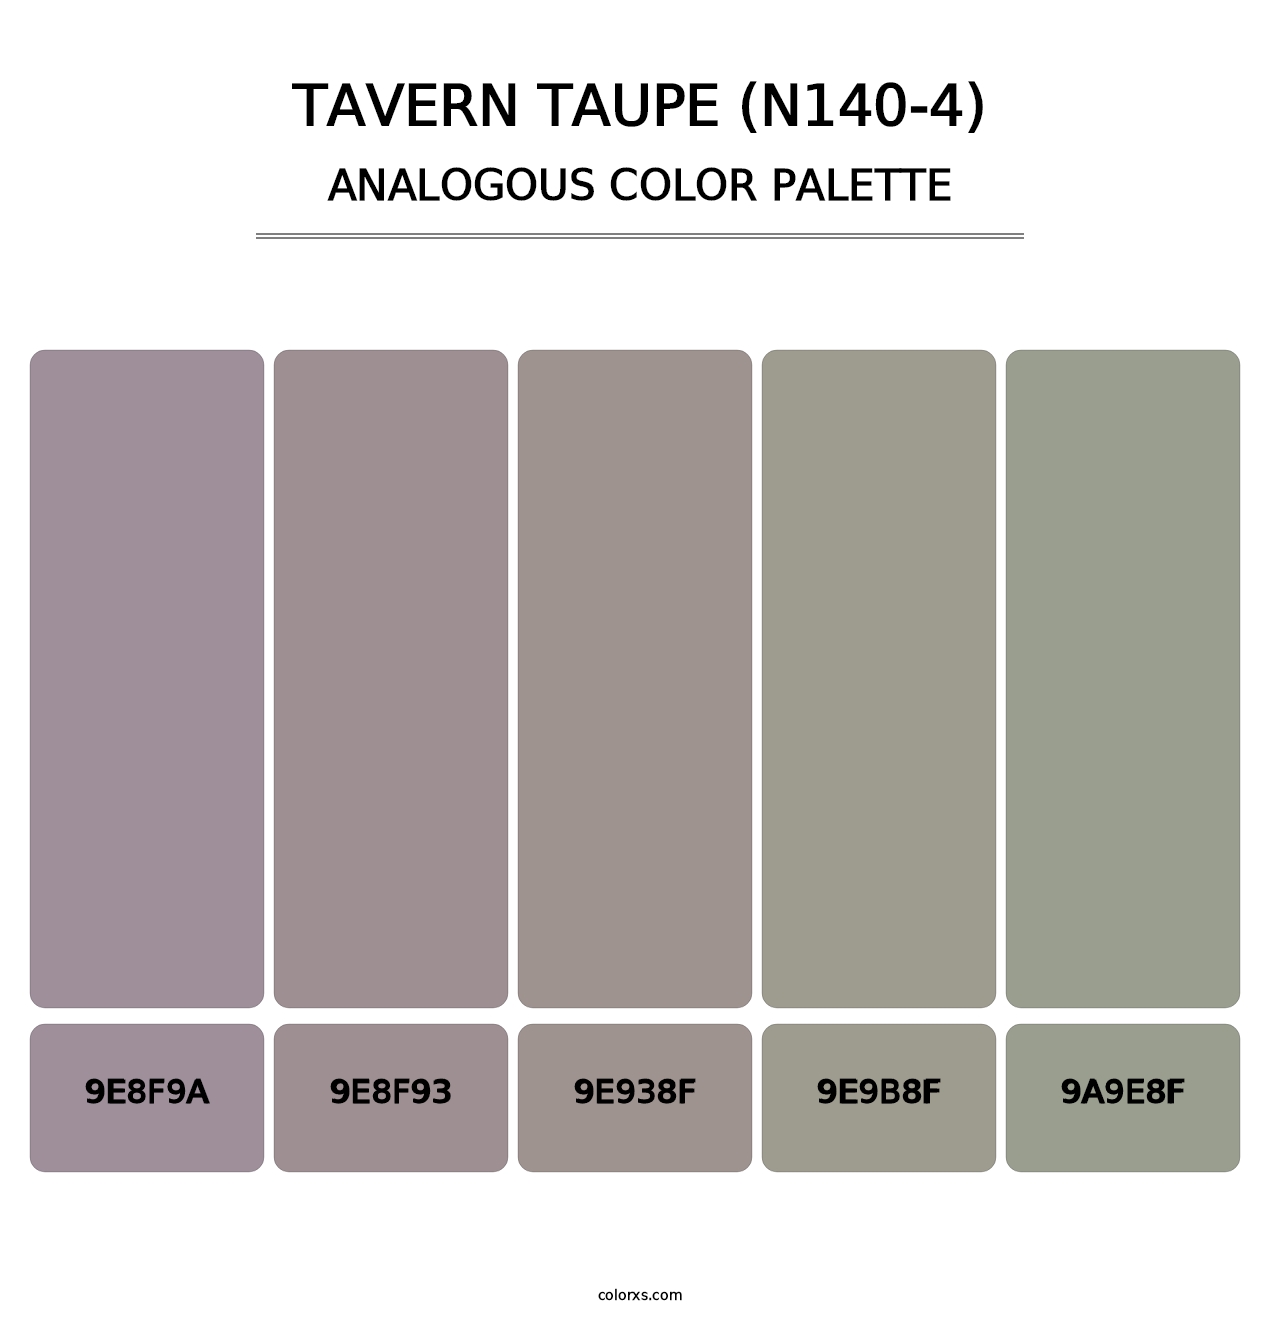 Tavern Taupe (N140-4) - Analogous Color Palette